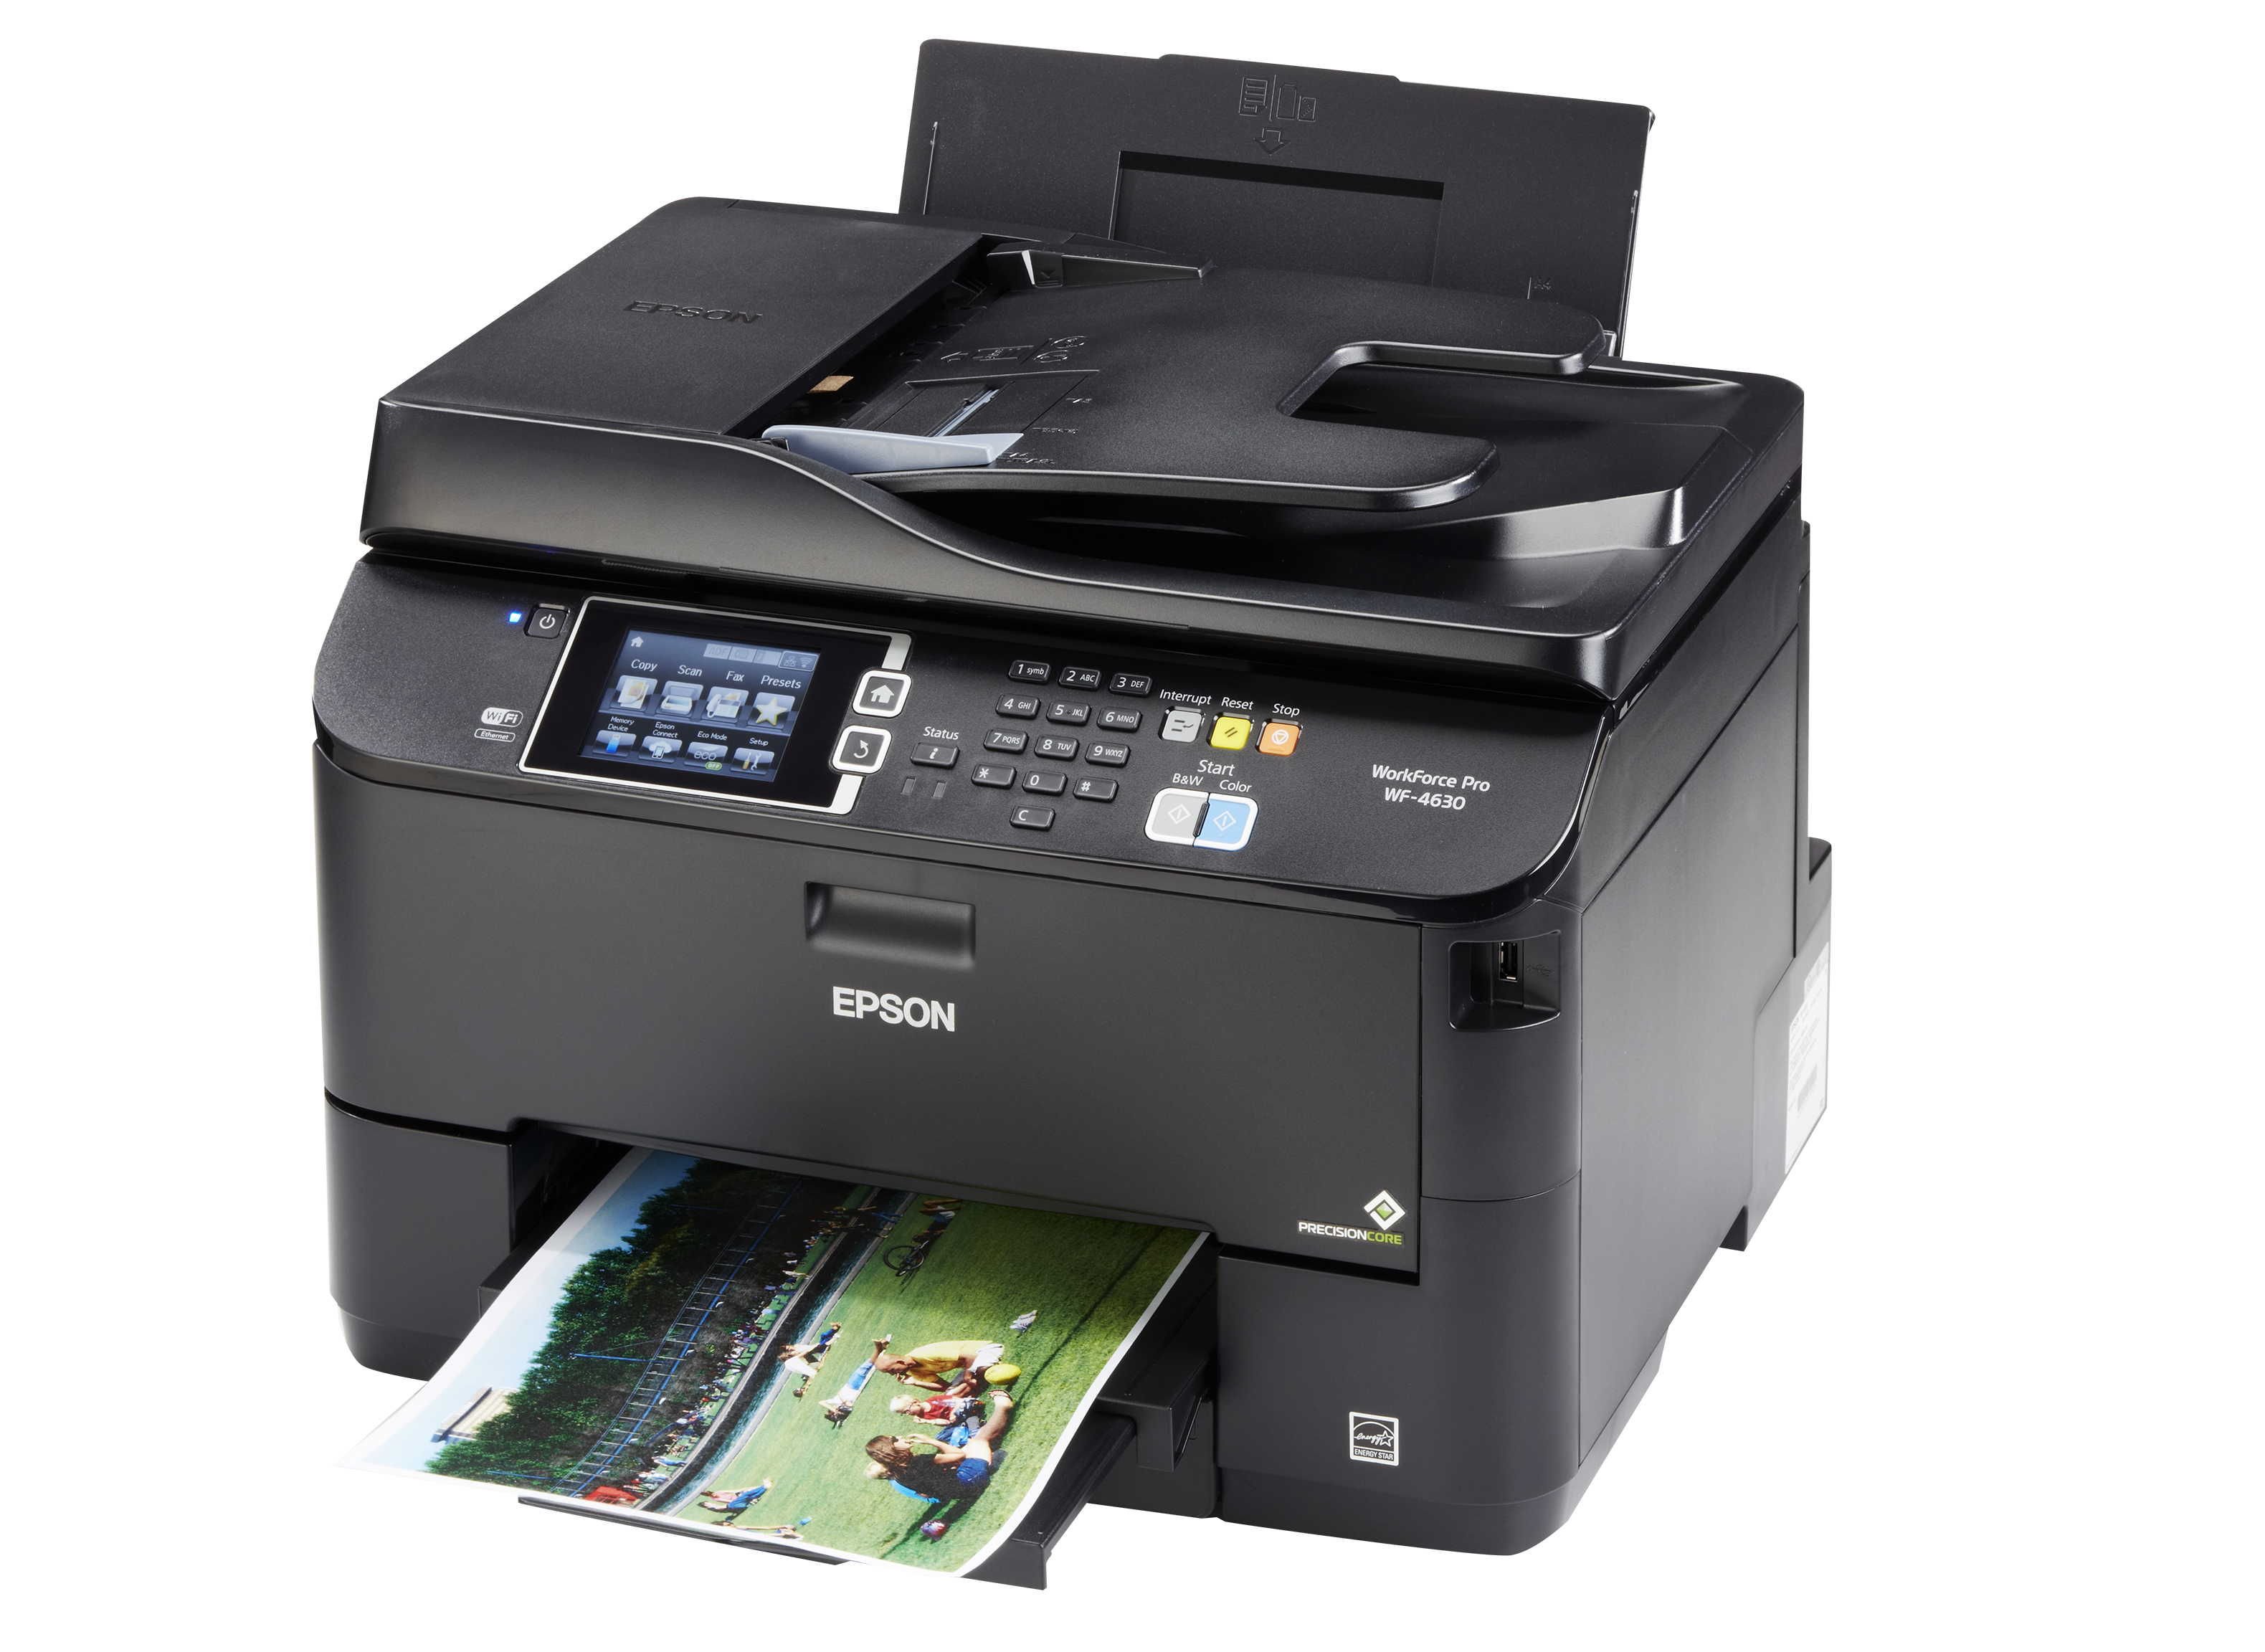 scaring Breddegrad lejlighed Epson Workforce Pro WF-4630 Printer Review - Consumer Reports